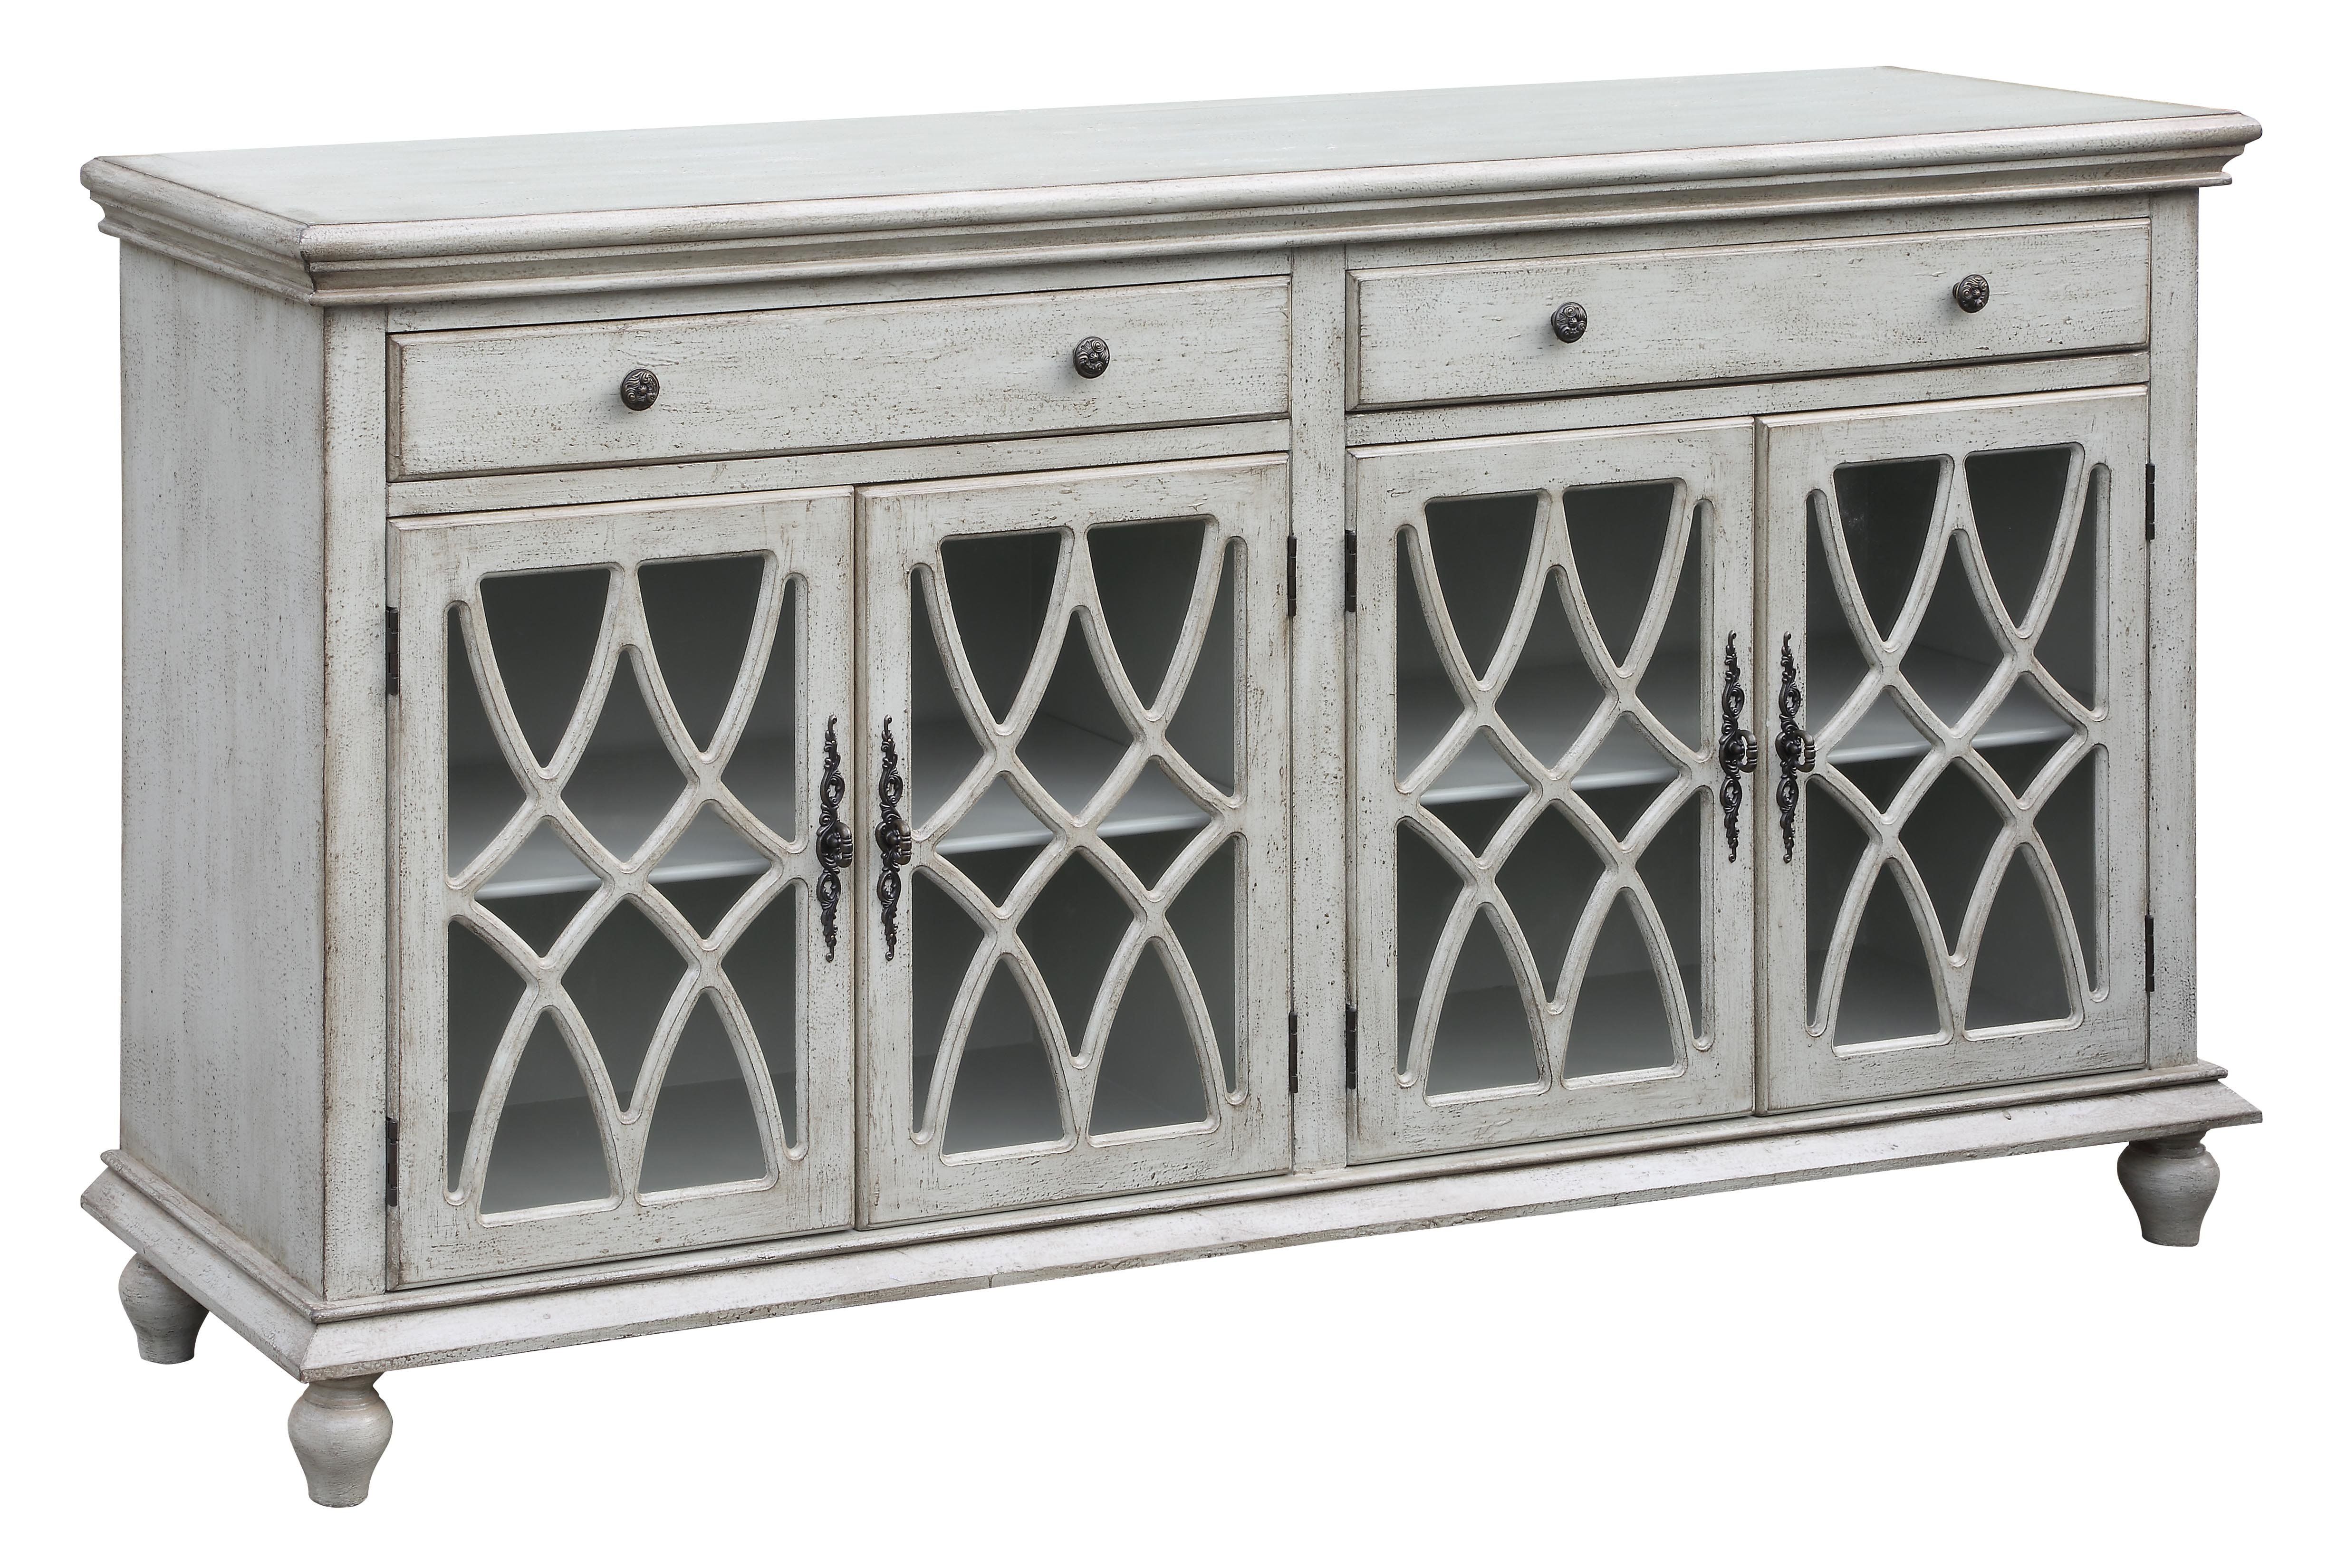 Assembled Sideboards & Buffets | Joss & Main For Latest Chicoree Charlena Sideboards (View 12 of 20)